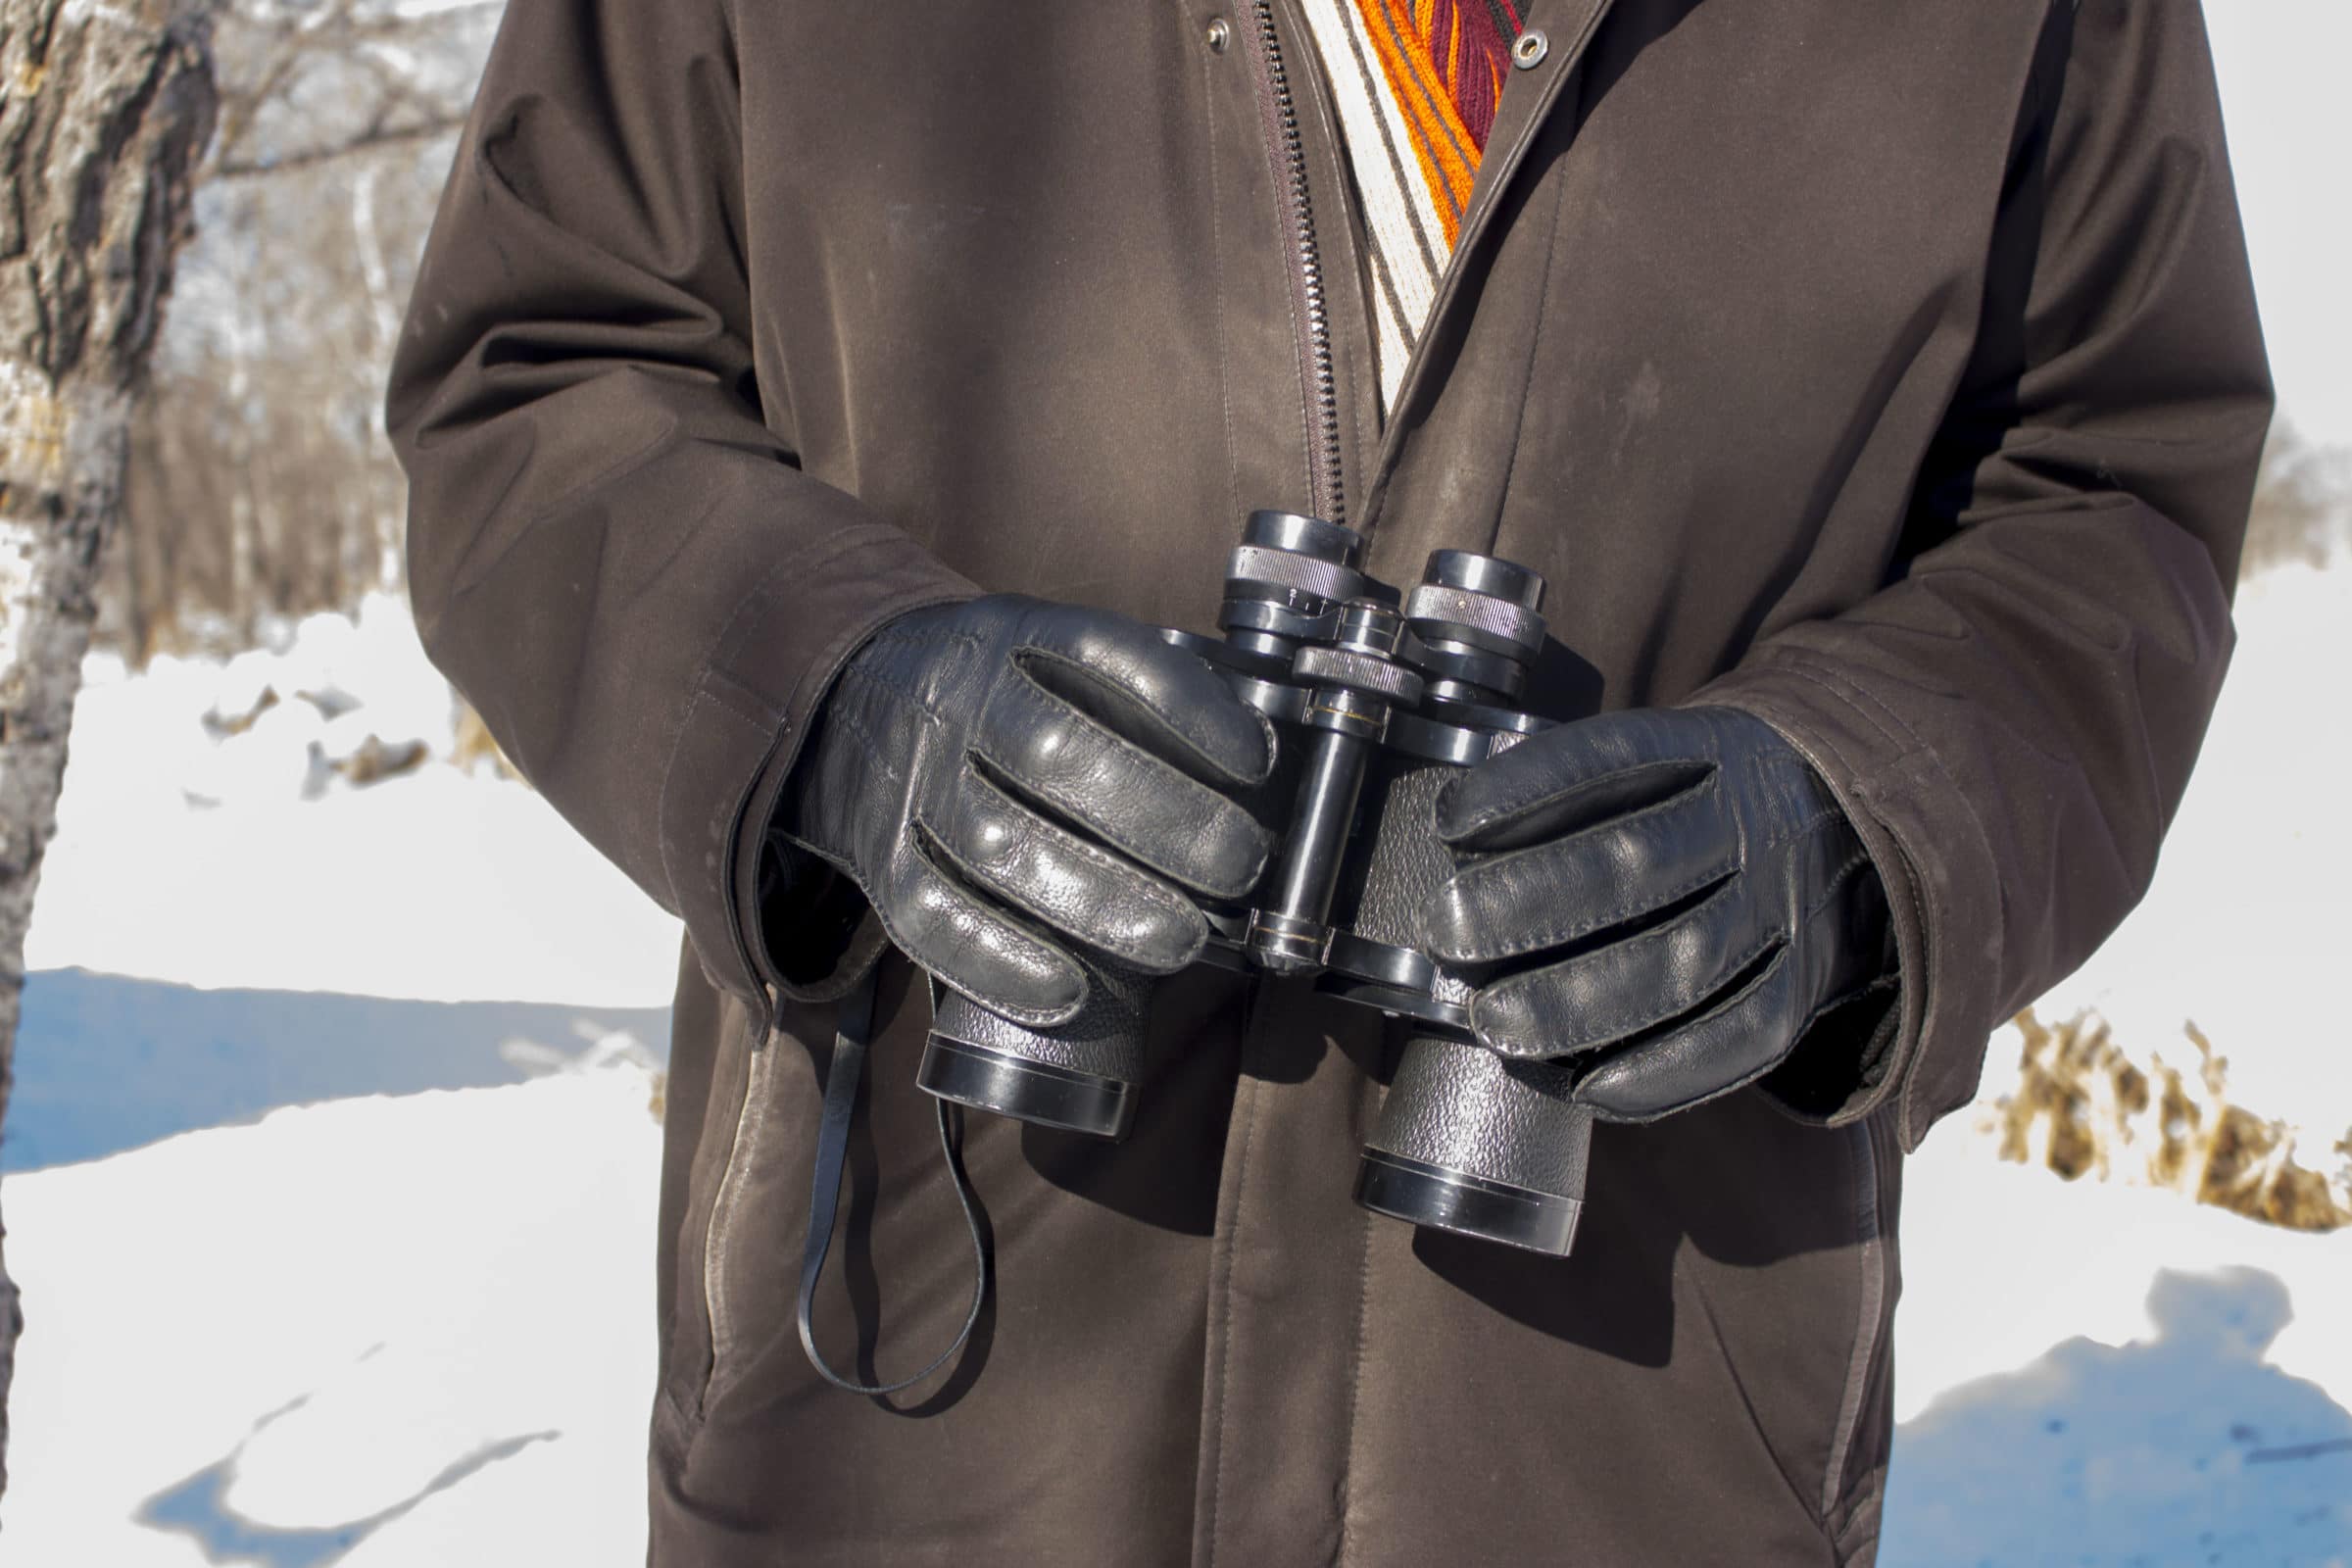 A pair of hands in leather gloves holds black binoculars at chest height.